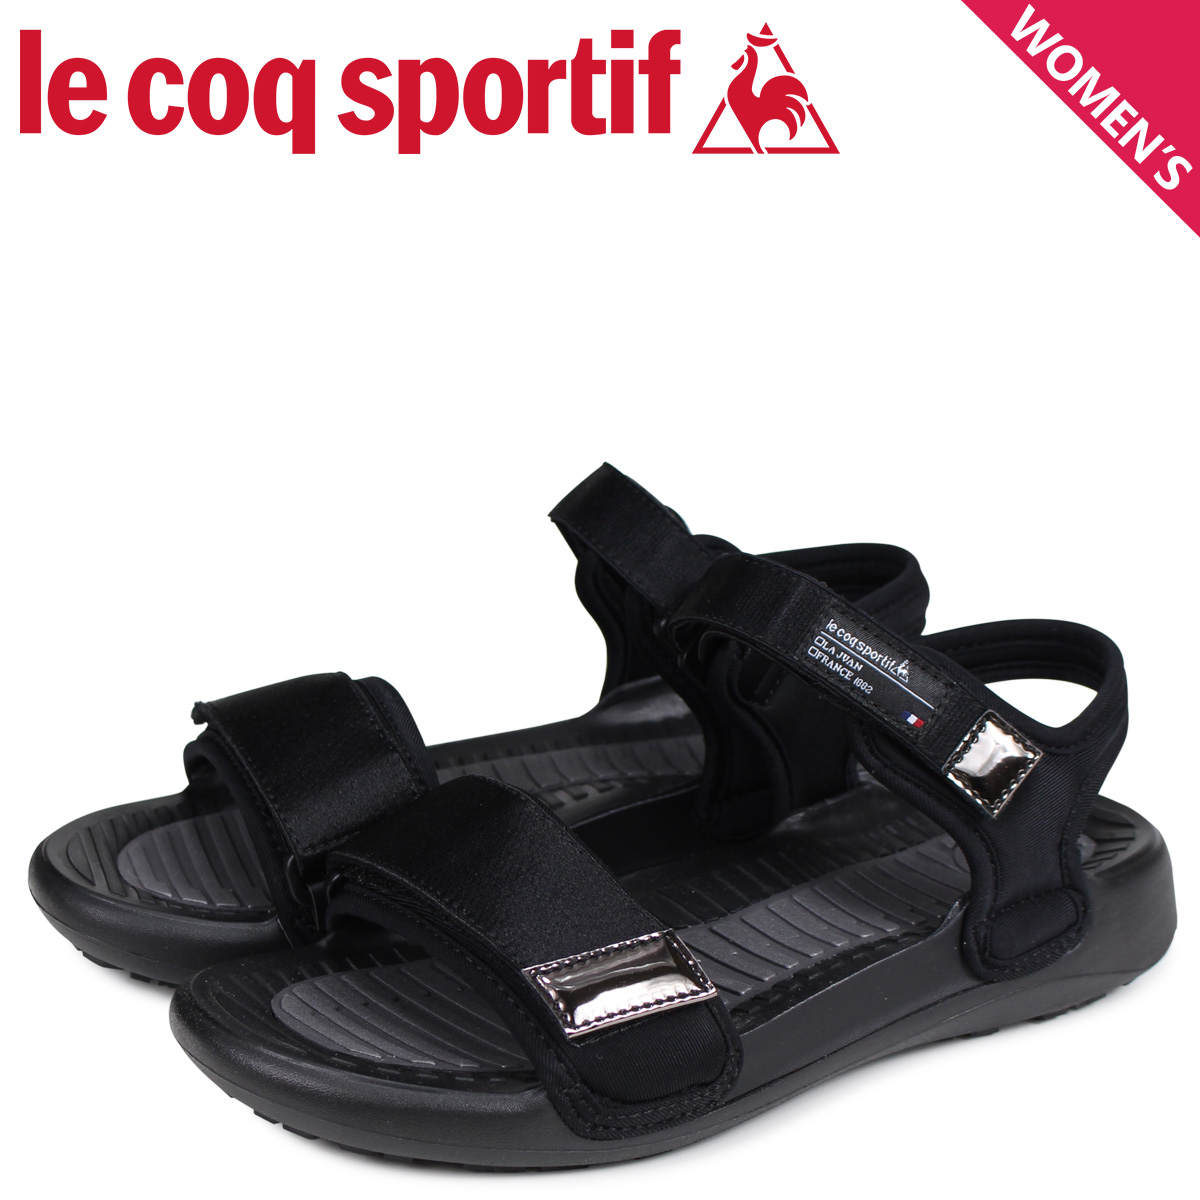 le coq sportif slippers Sale,up to 55 